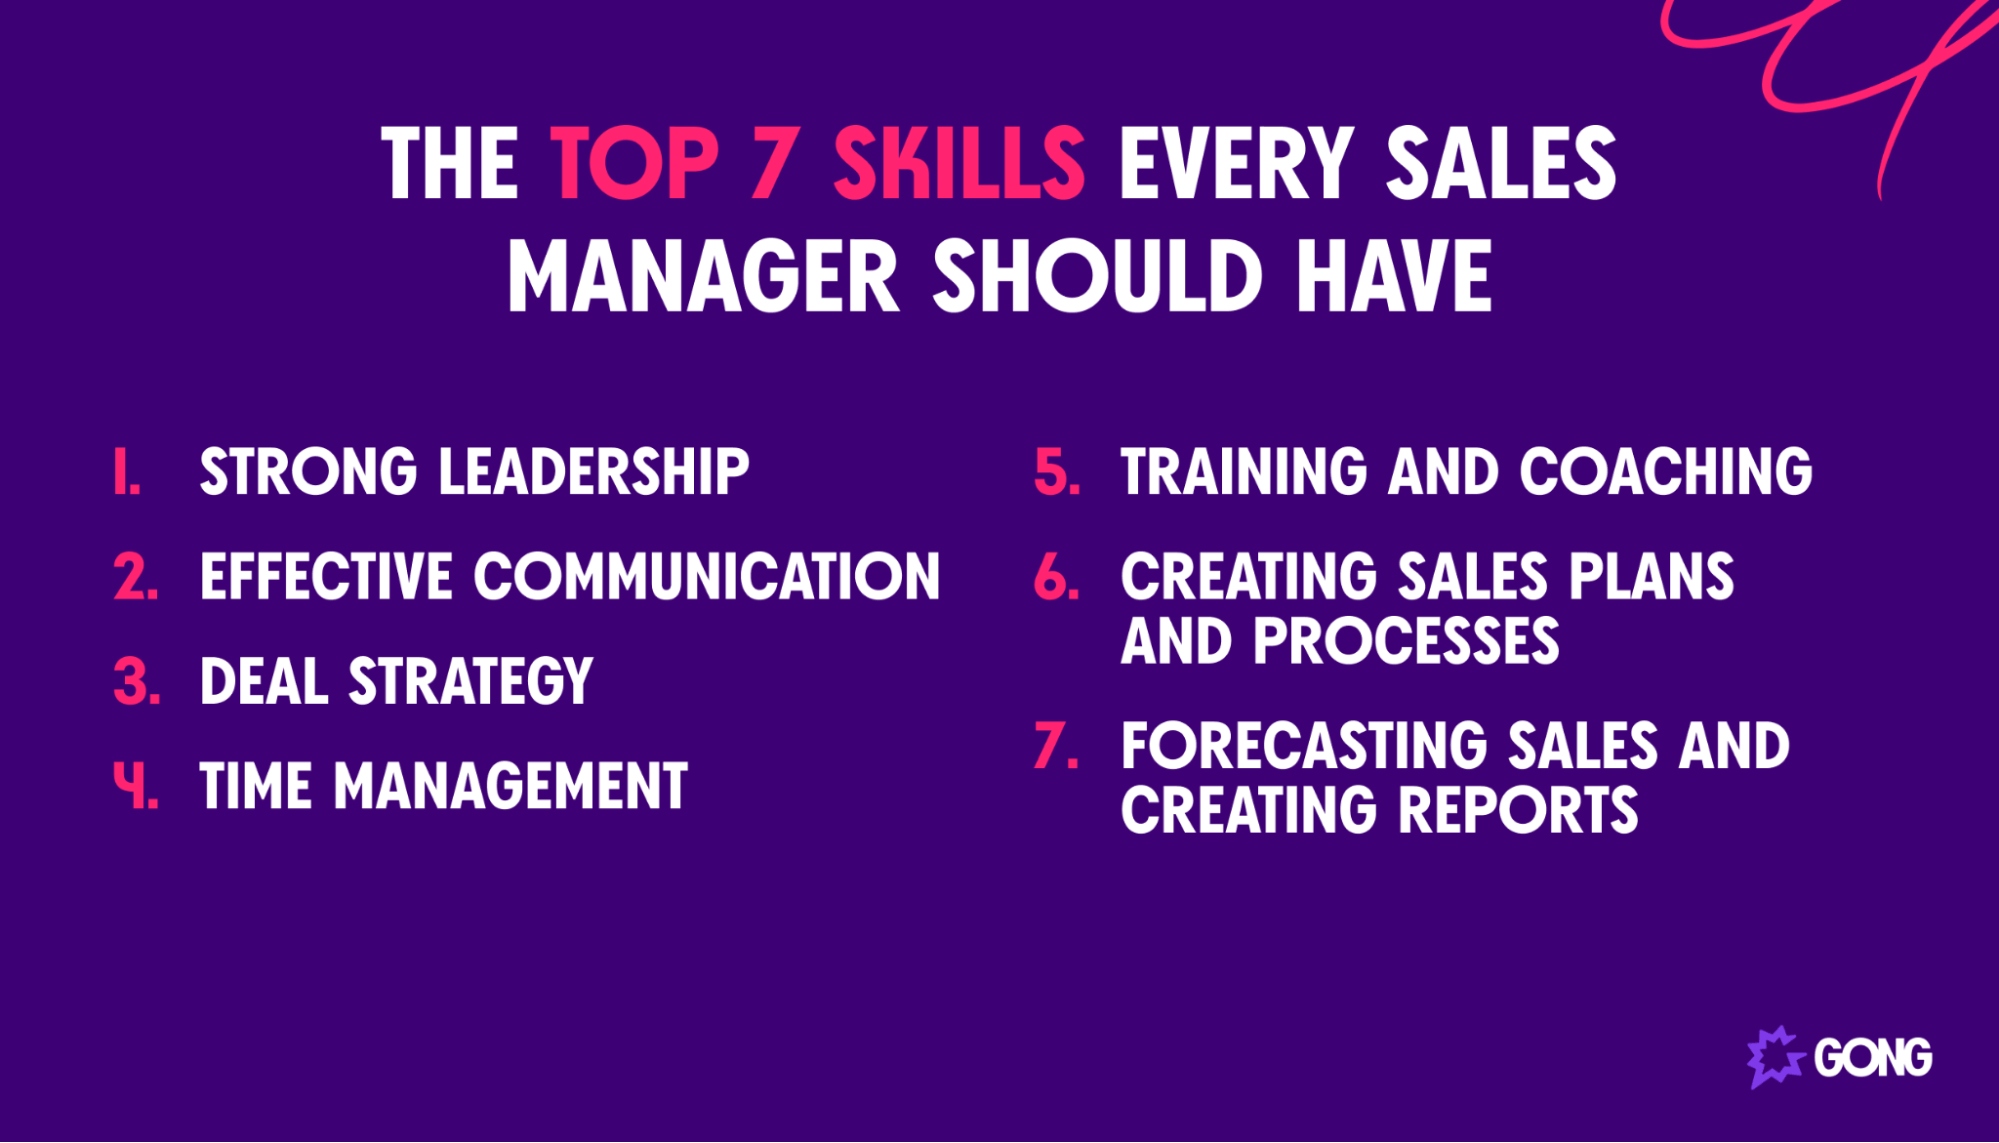 The top 7 skills every sales manager should have